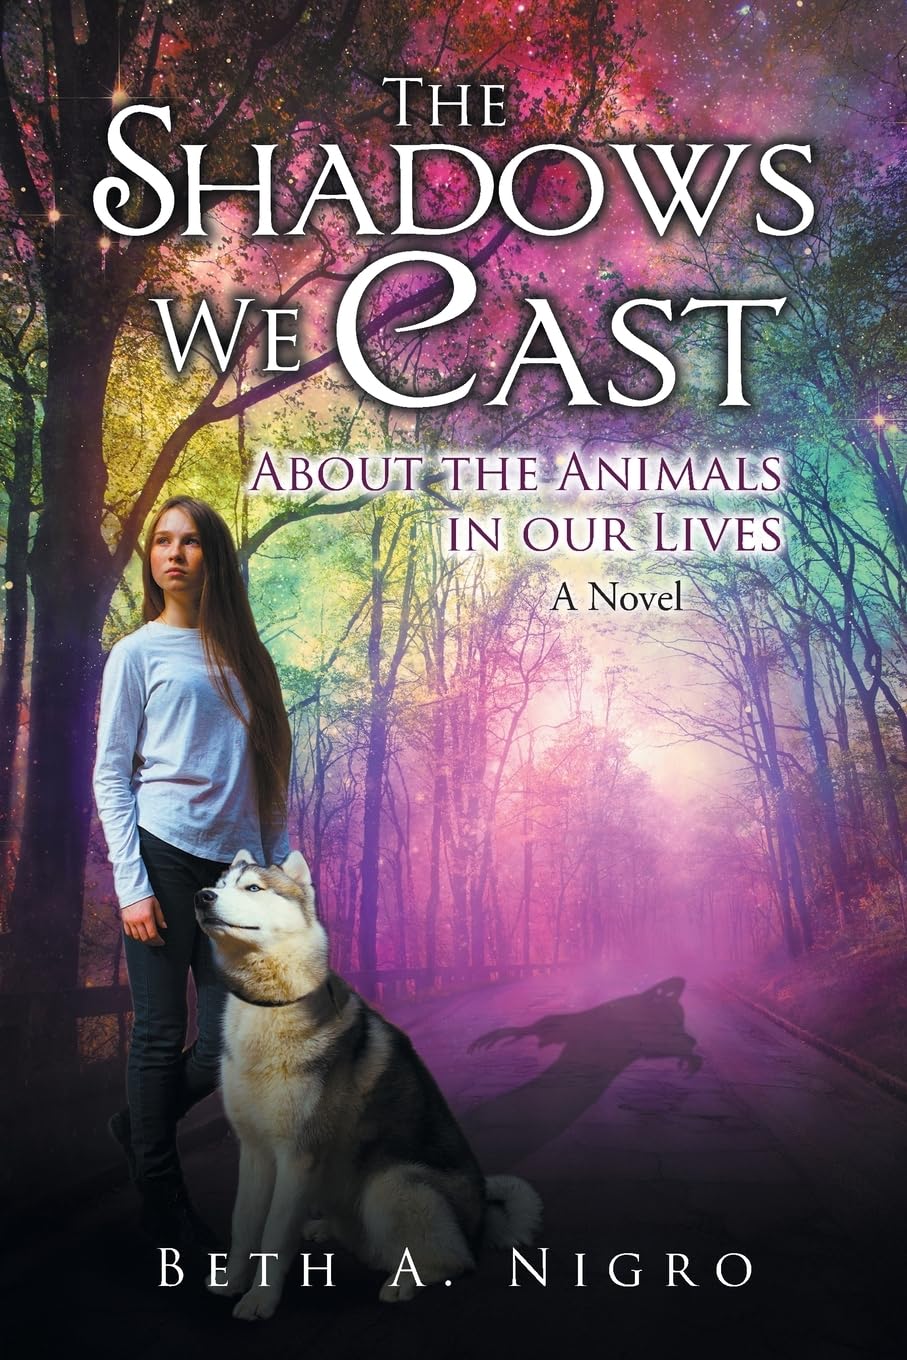 Unconditional Bonds: Exploring Canine Love in 'The Shadows We Cast' by Beth A. Nigro 